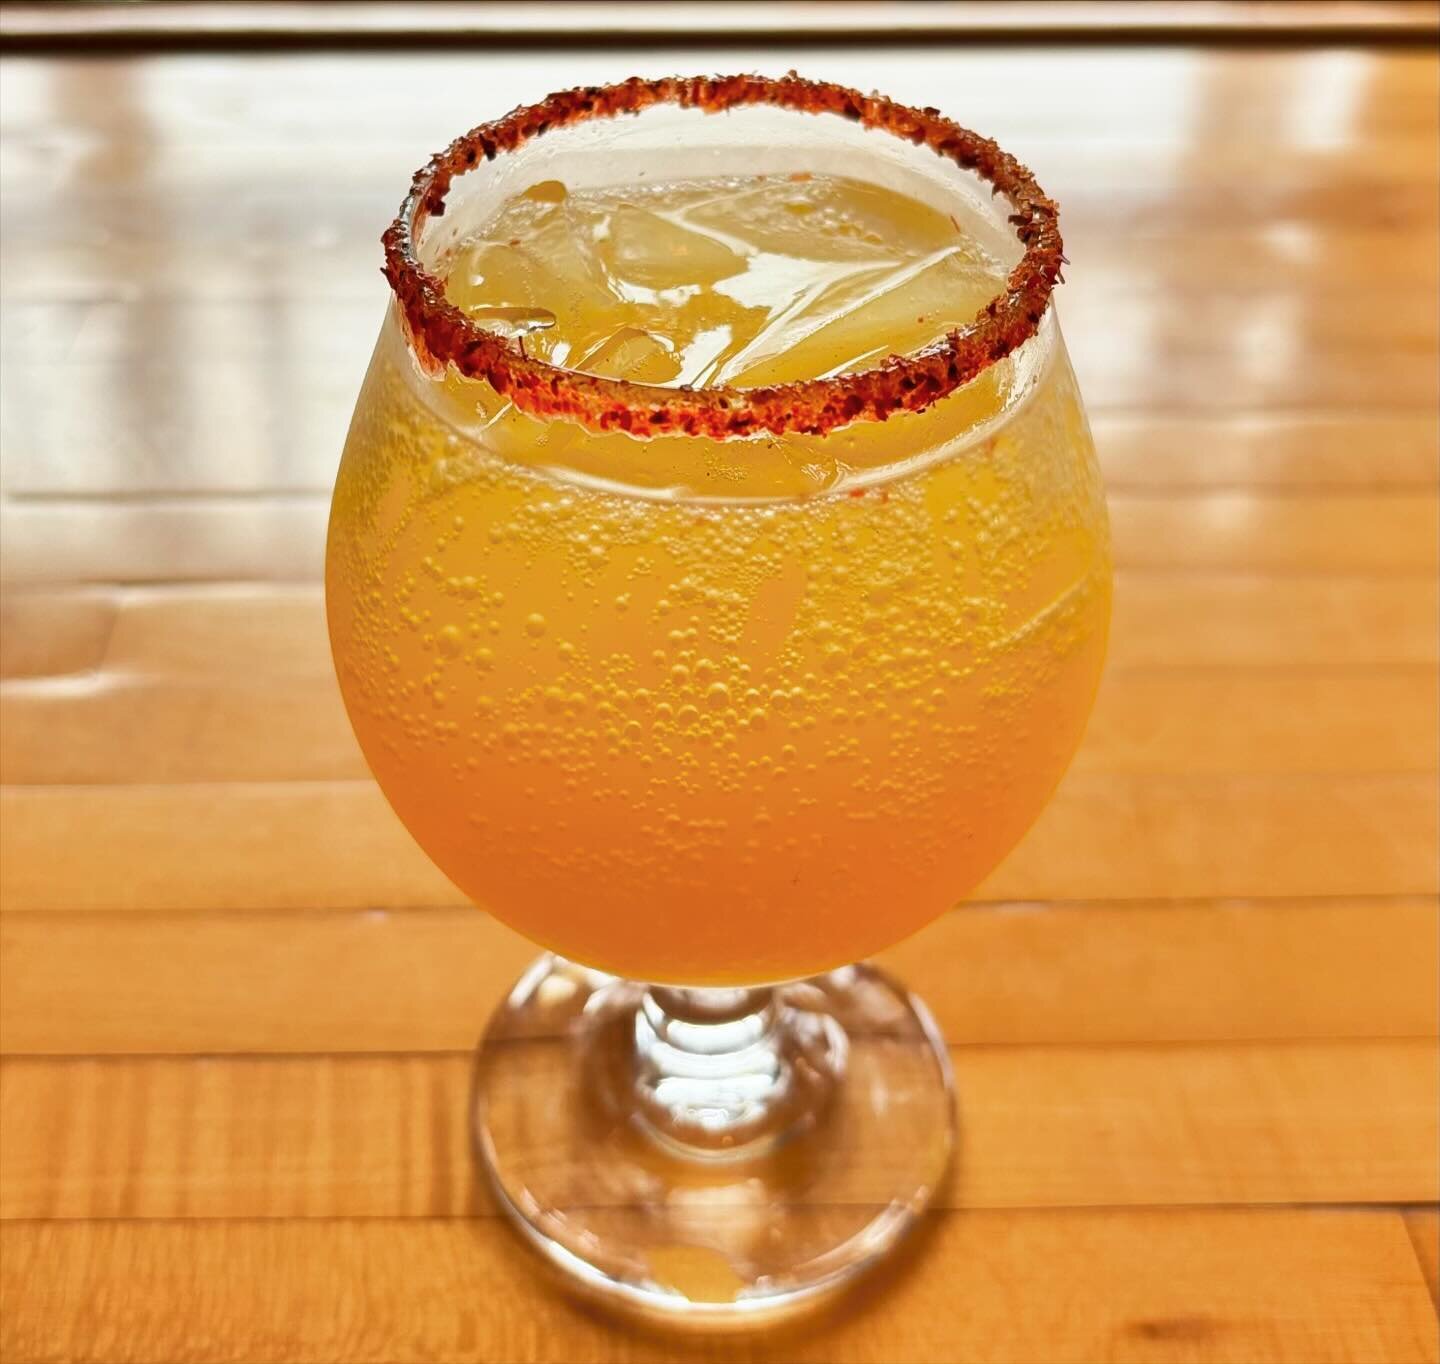 New Menu!! Spring is here and so are our new lunch and drink menus. Featuring our new seasonal mocktails. Pictured is our Picoso Sunrise. A house-made mango chili sparkling refresher to wake up your taste buds. Come in and check out our new seasonal 